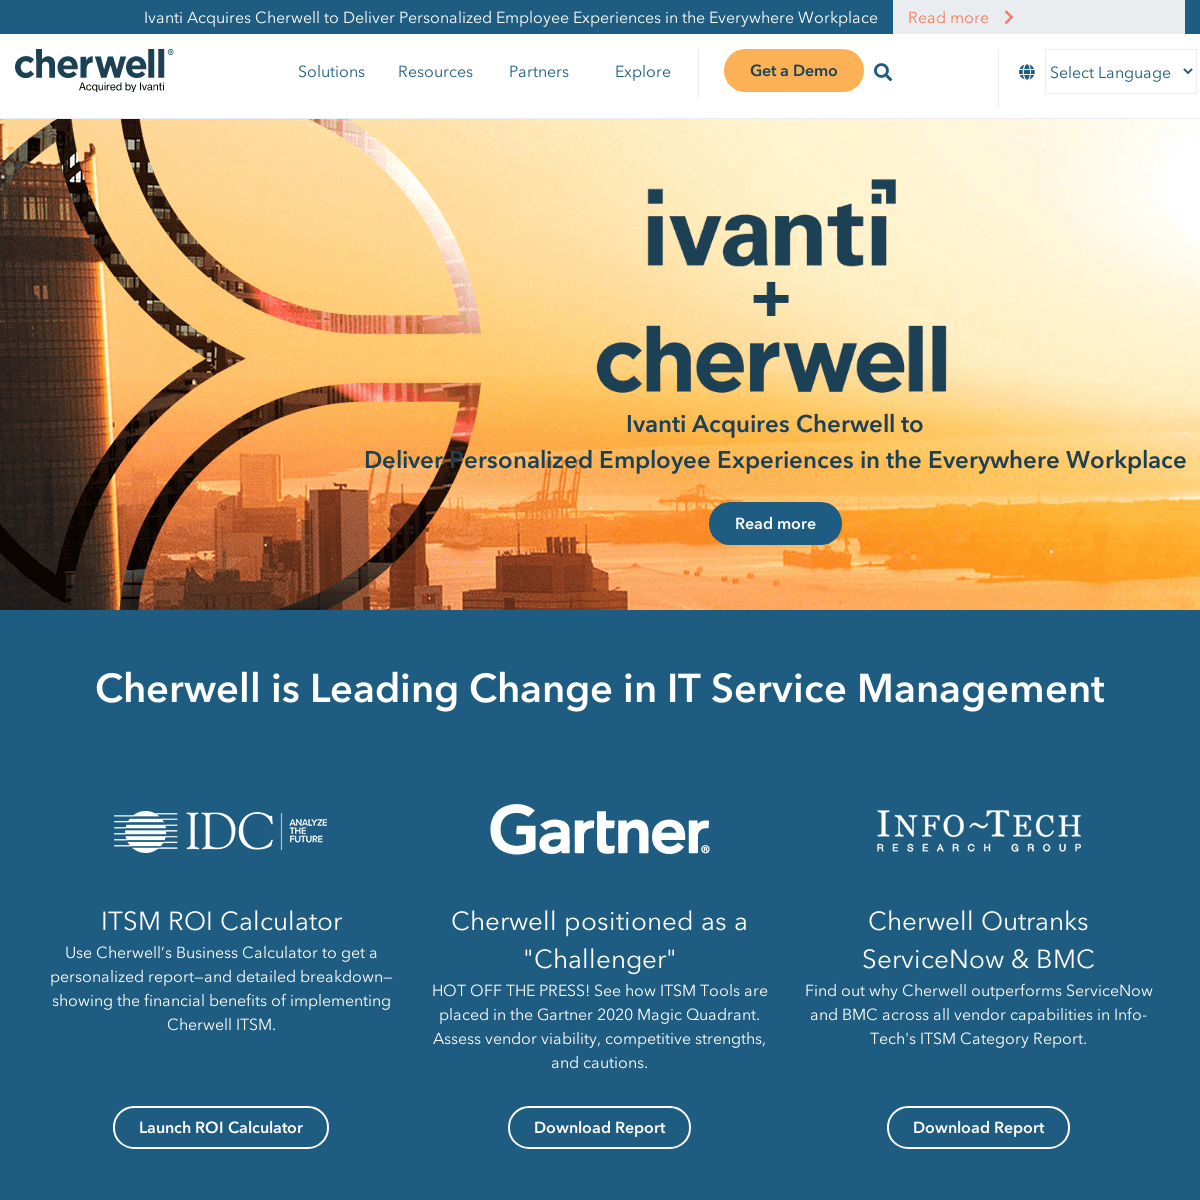 A complete backup of https://cherwell.com